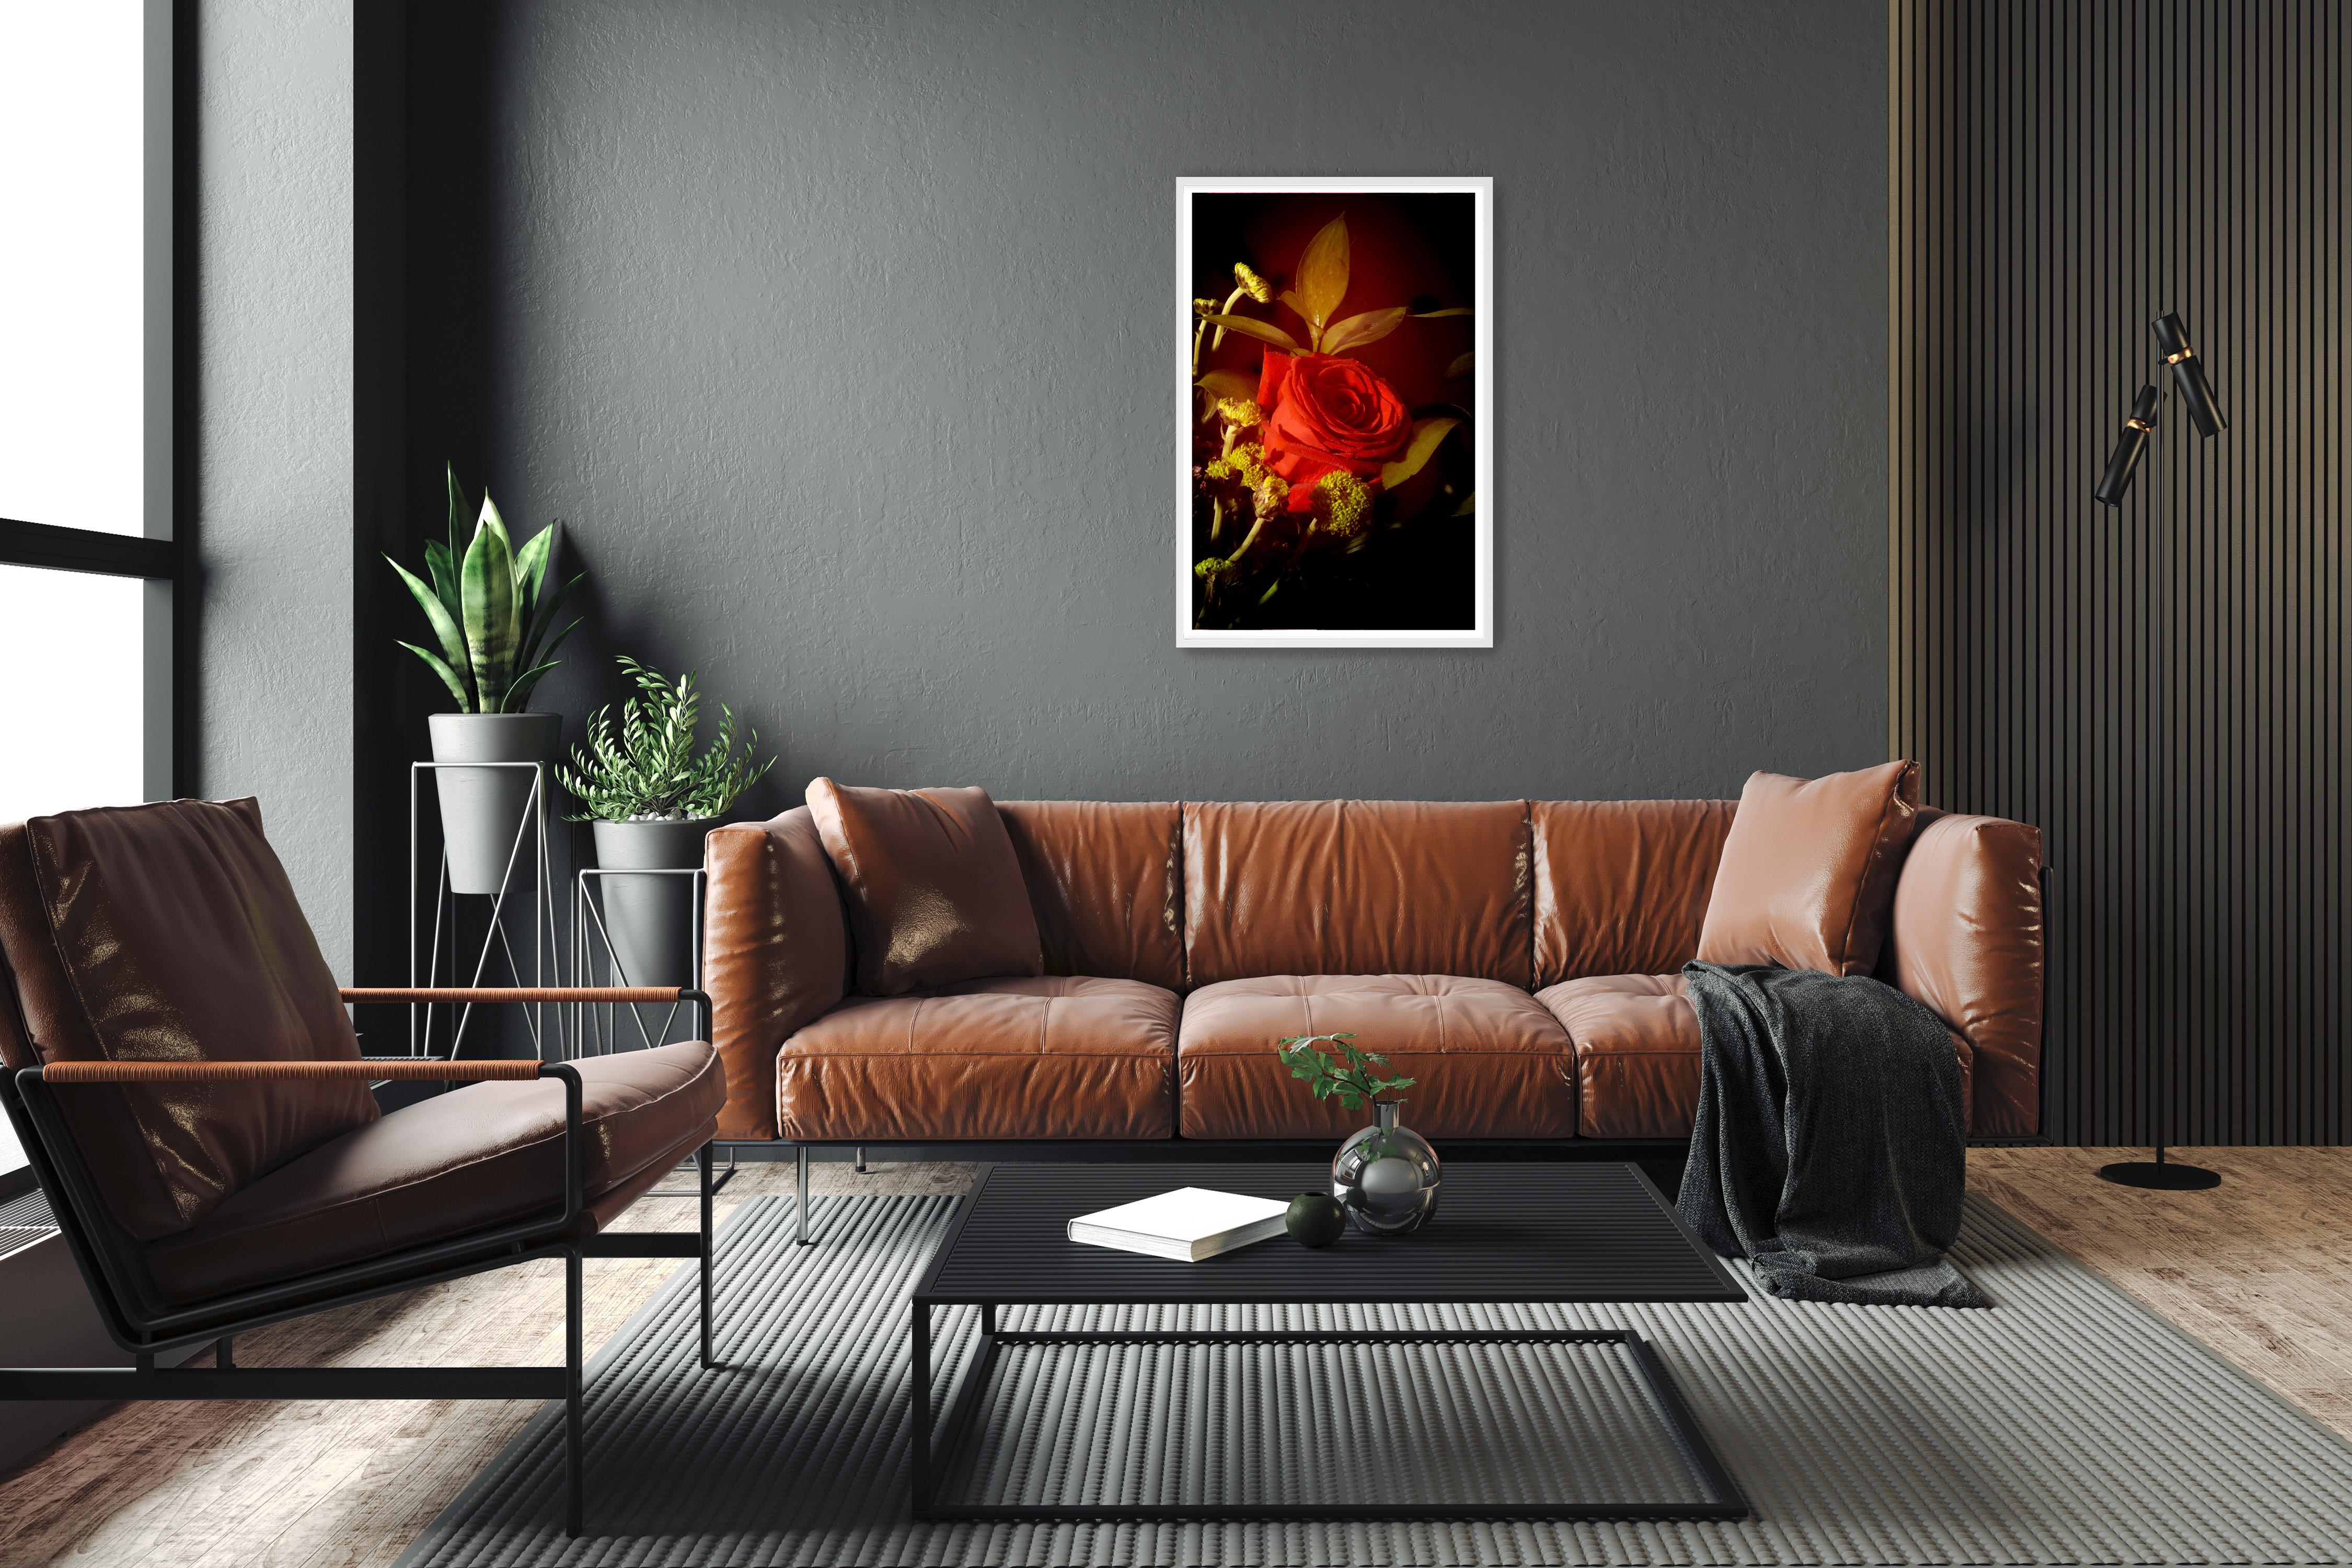 This is an exclusive limited edition color Giclée print, printed on matte photographic paper.

This exquisite still life photo, shows a classy bouquet beautifully lit with soft light.

The print measures 36 x 24 inches total, with an image size of